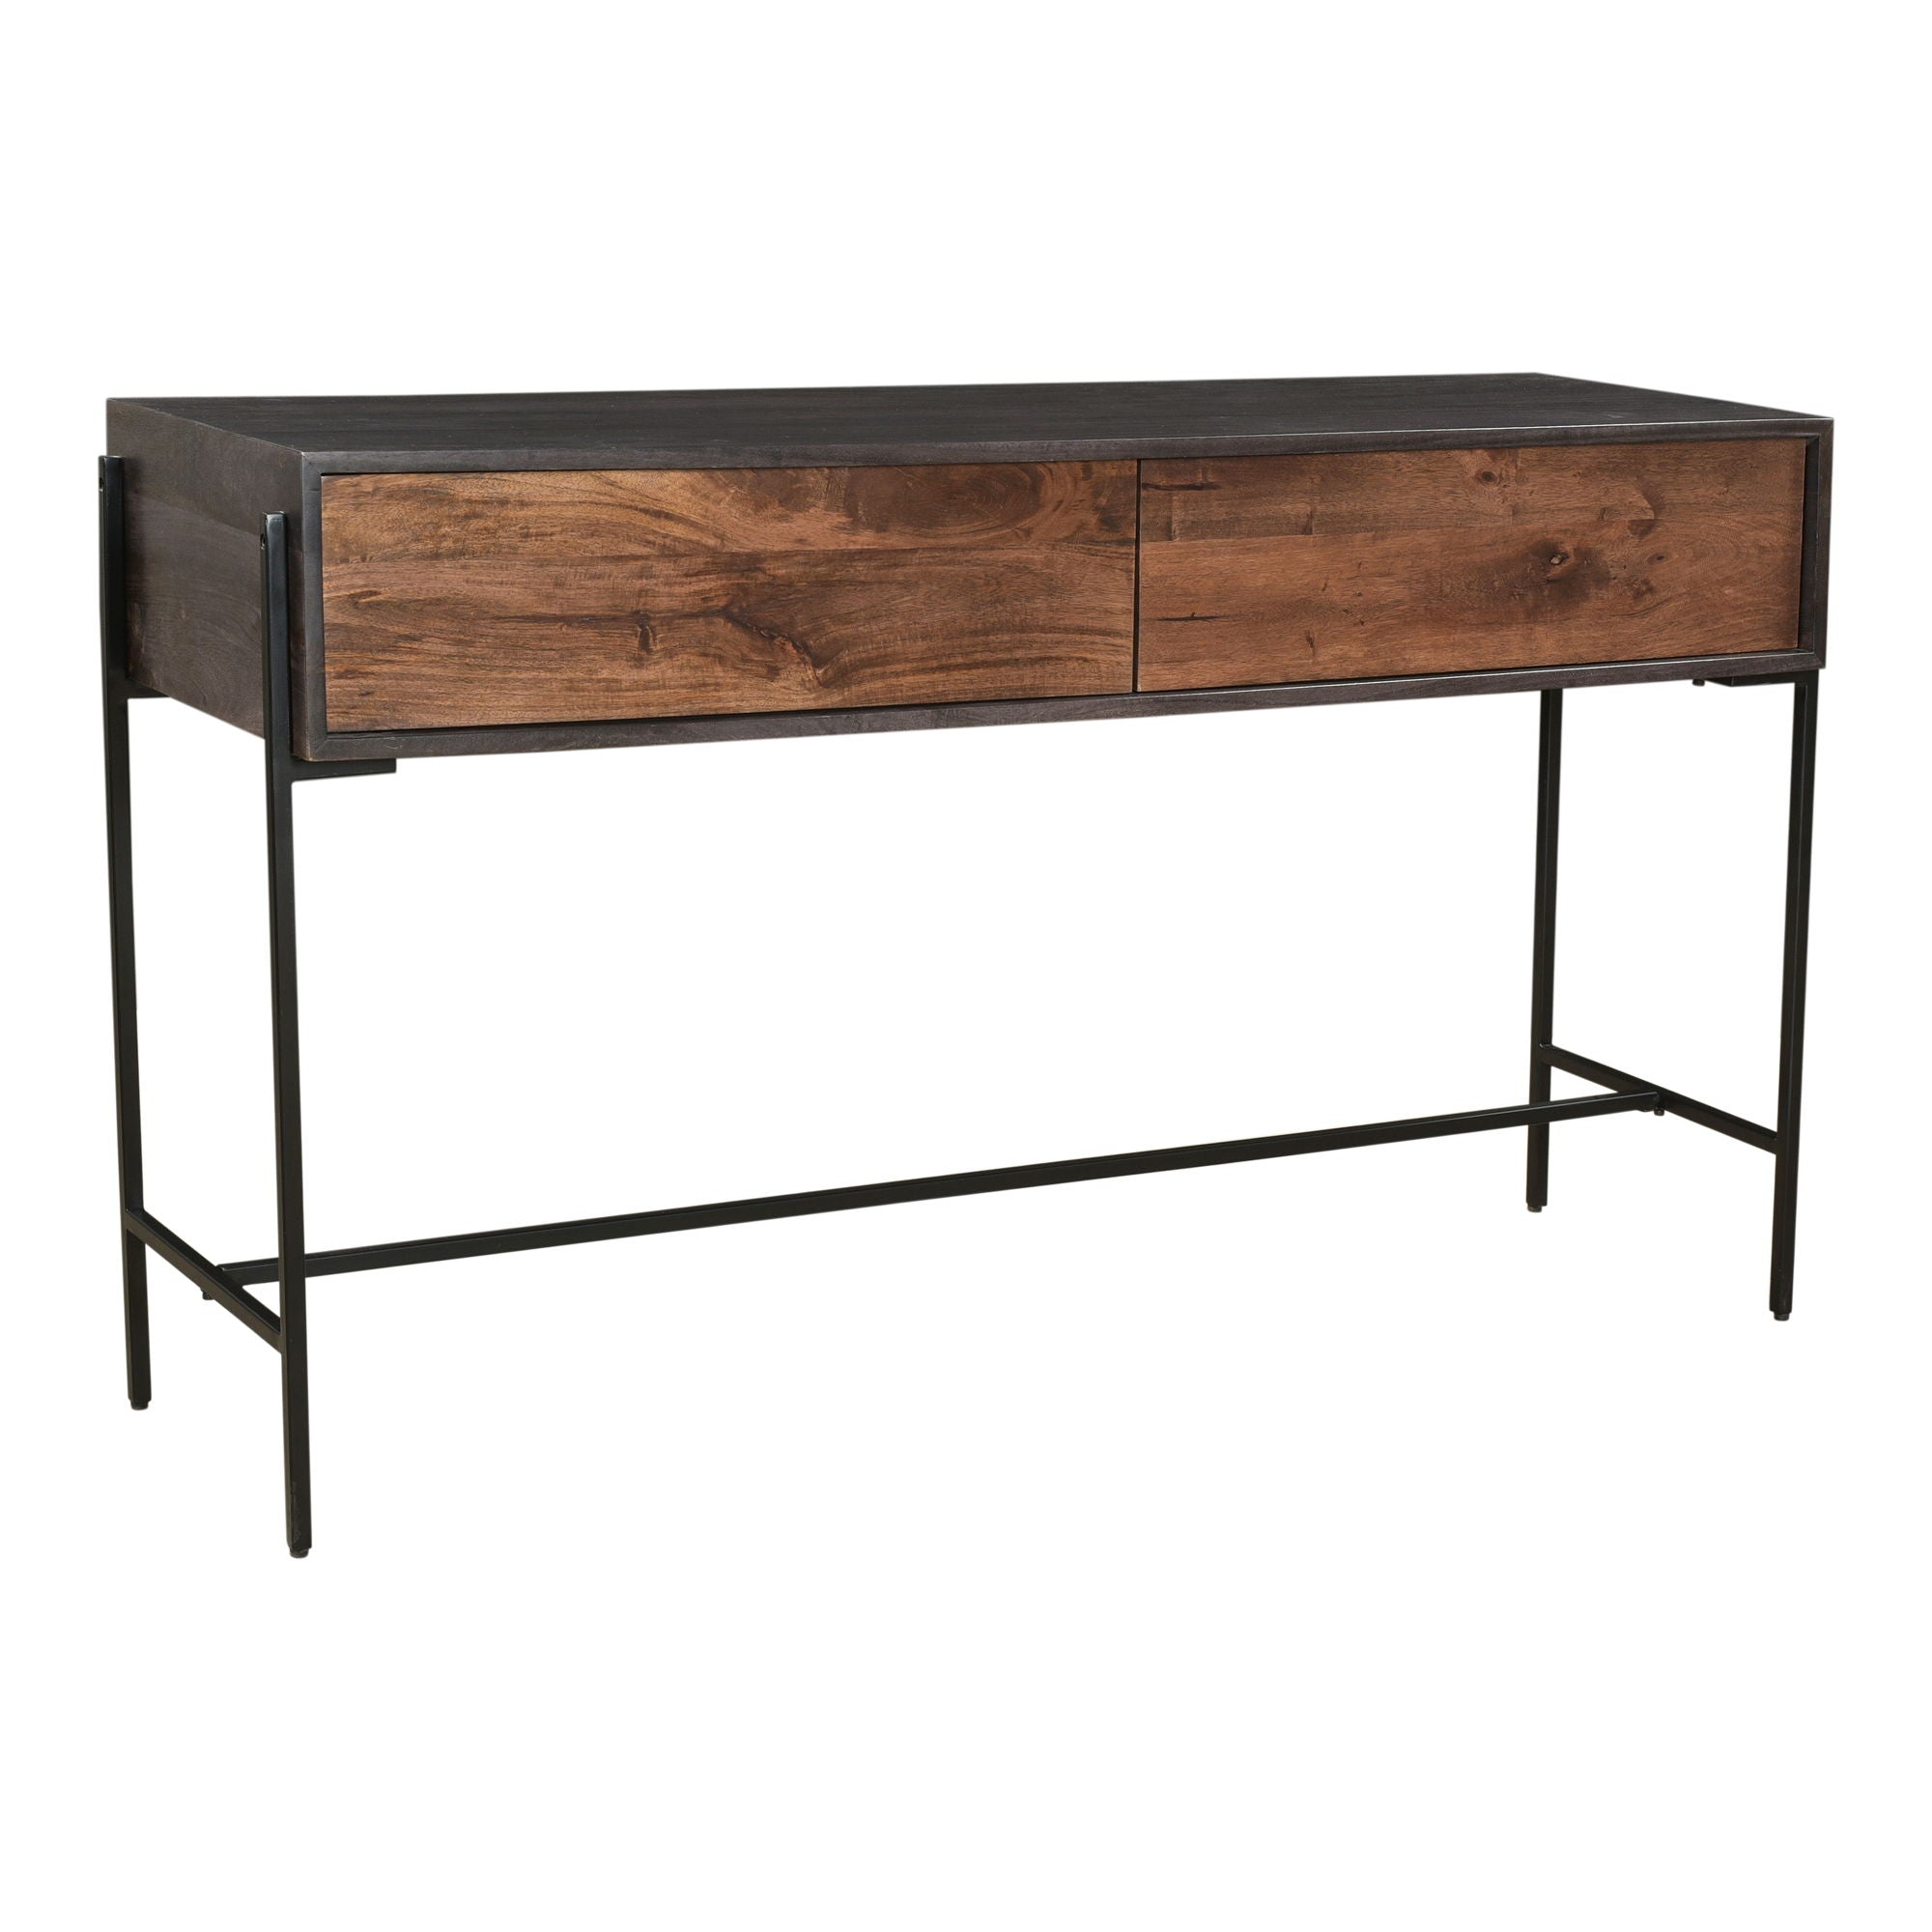 Tobin - Console Table - Brown